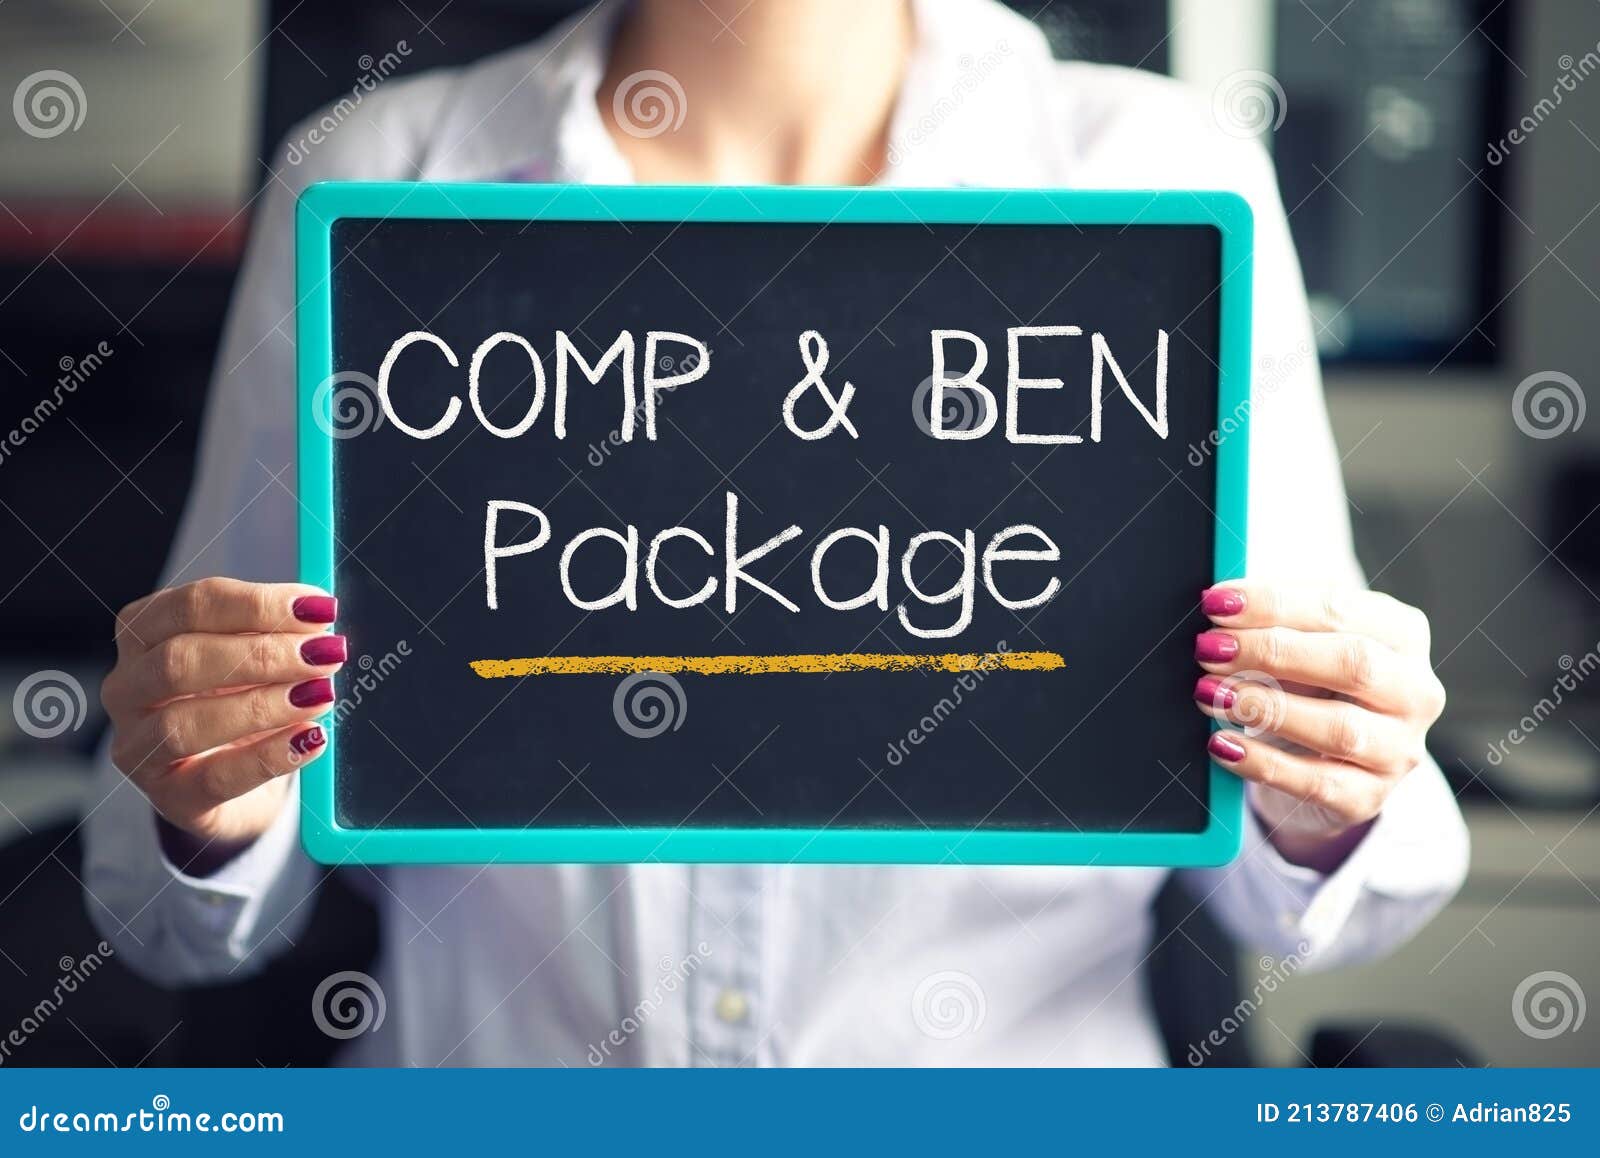 compensation and benefits at job concept with comp and ben text written on cardboard hold by employee